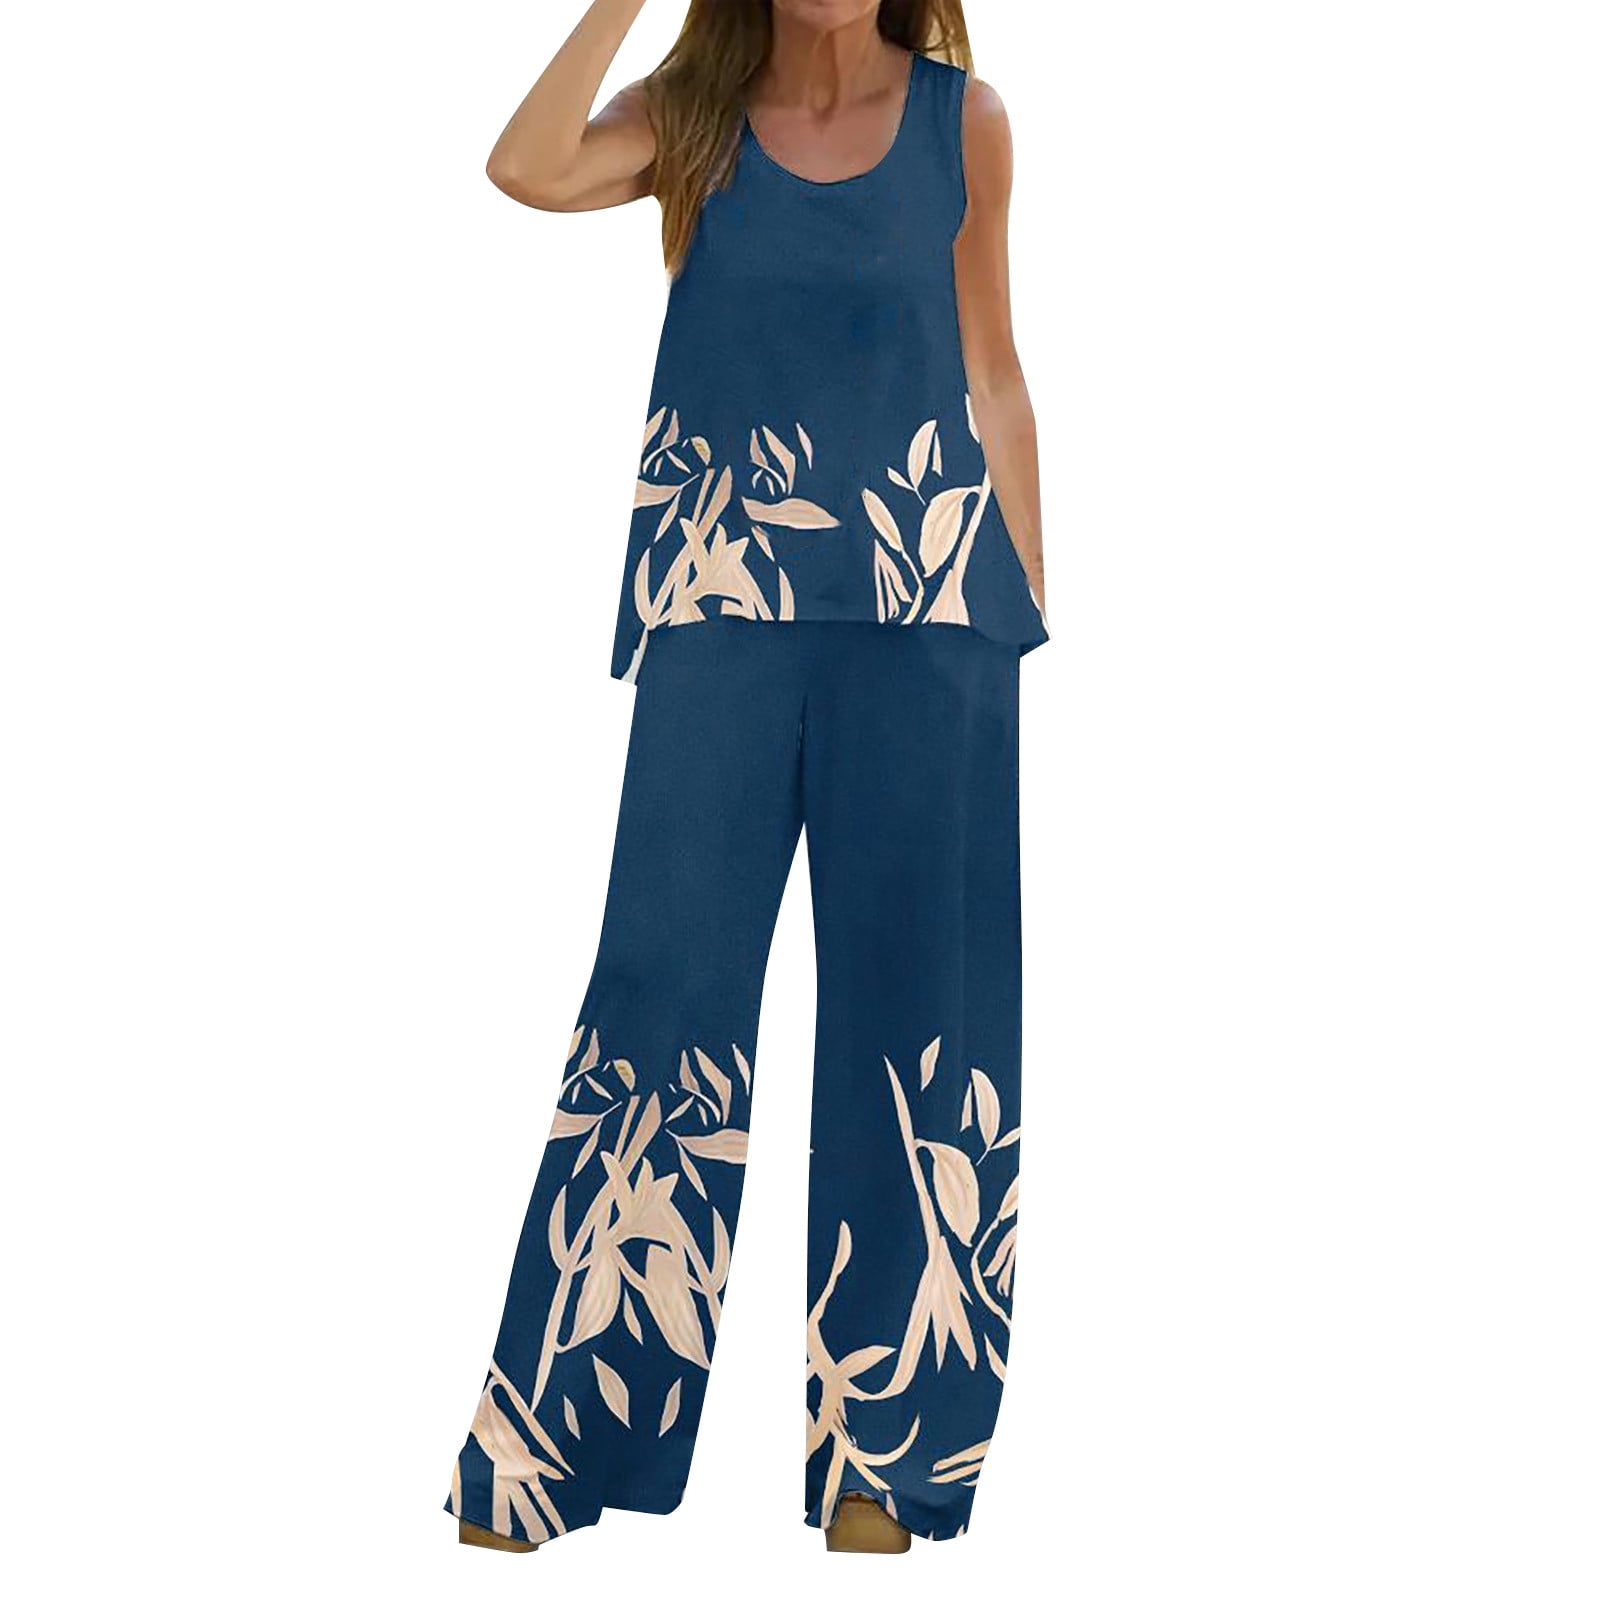 Polyester Pant Suit Women Women 2 Piece Outfits Boho Casual Letter Printed  Vest Sleeveless Top Loose Wide Leg Pants Trousers Two Piece Set Suit  Stretch Pants Suit 